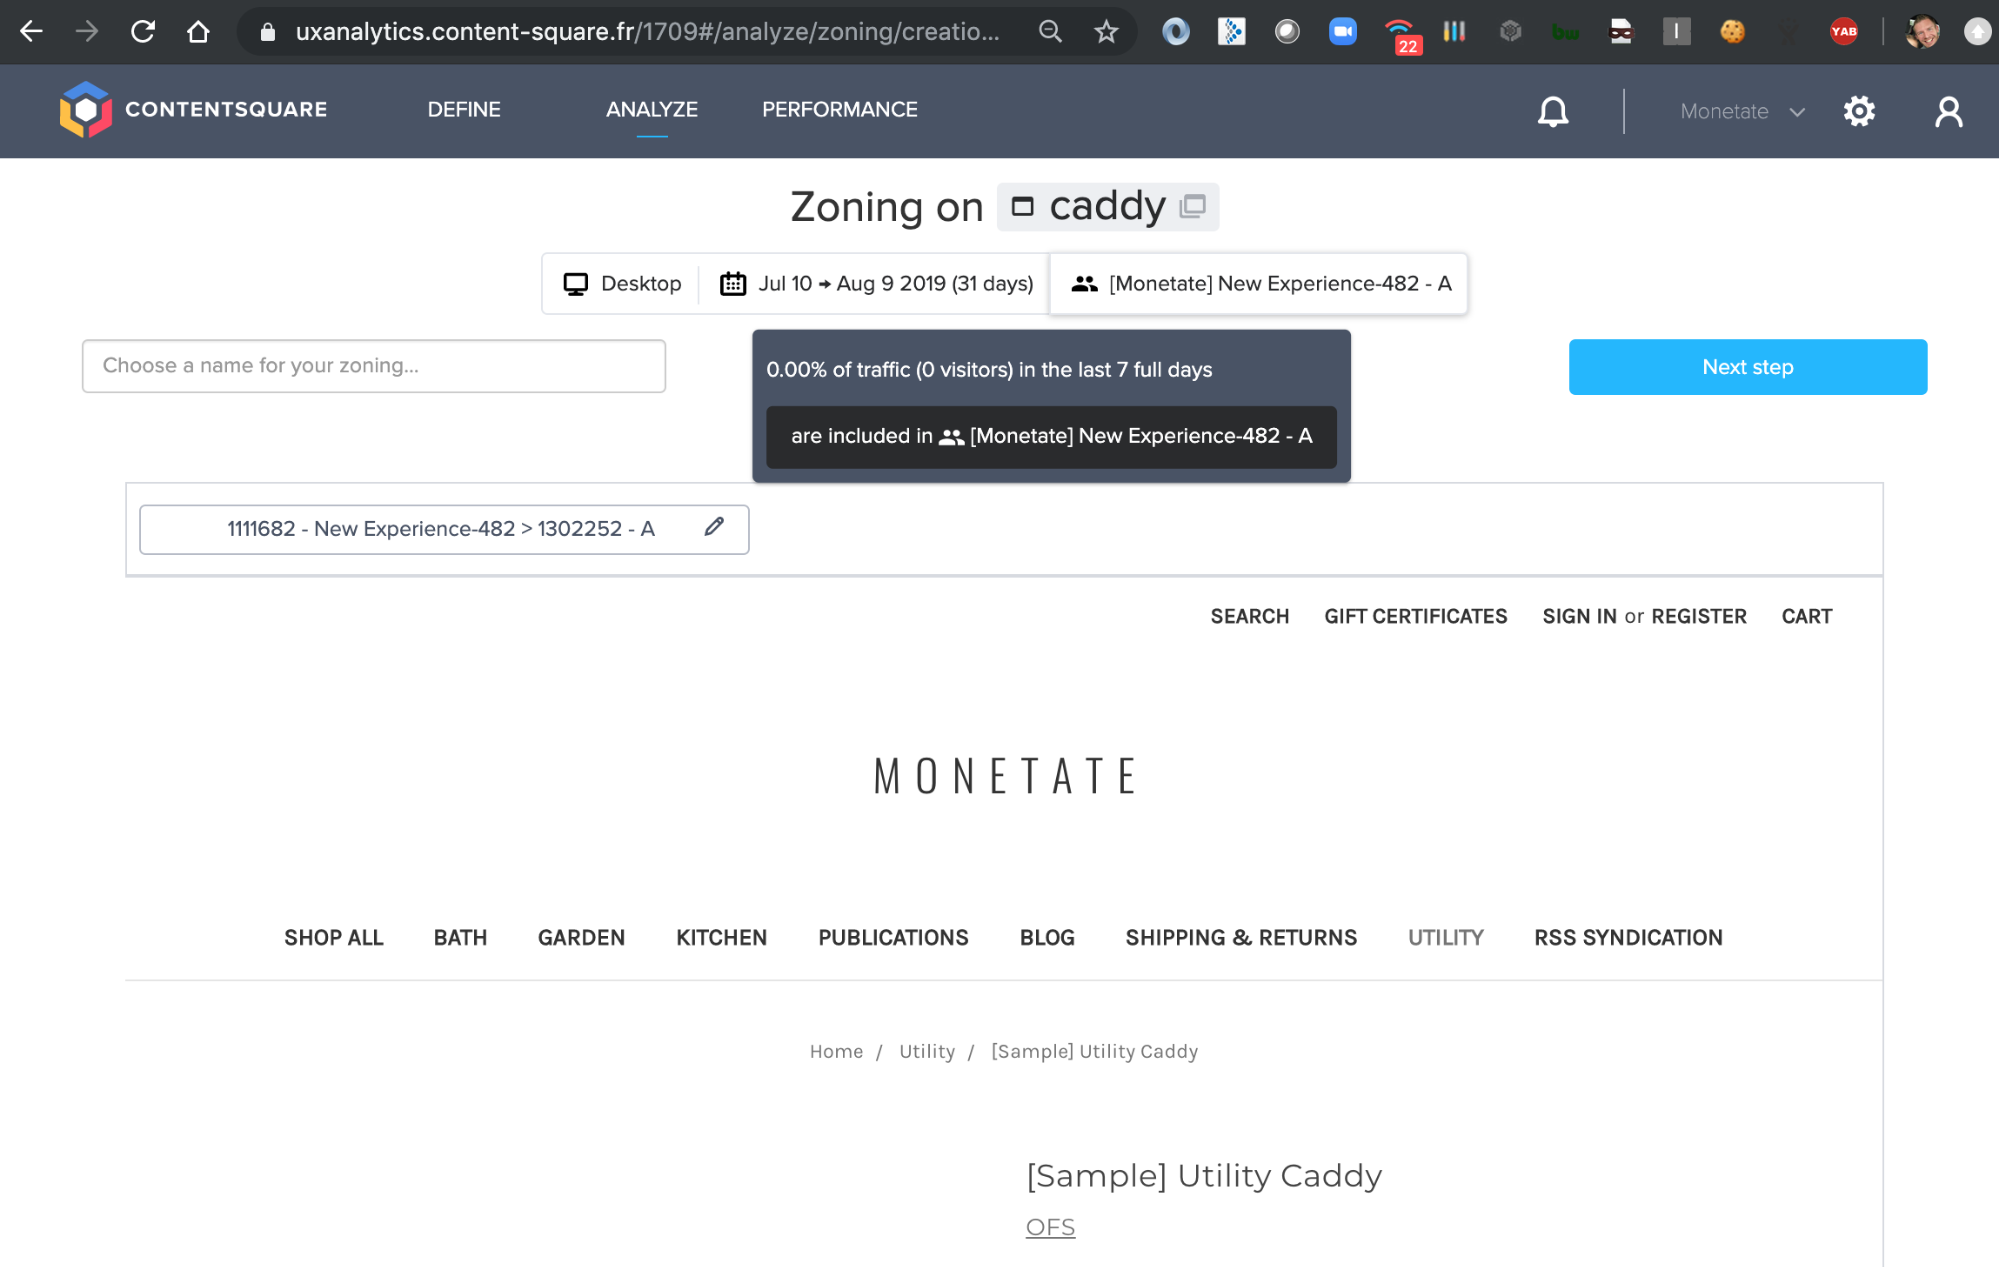 Contentsquare Zoning information overlaying a product detail page on which a Monetate experience is running